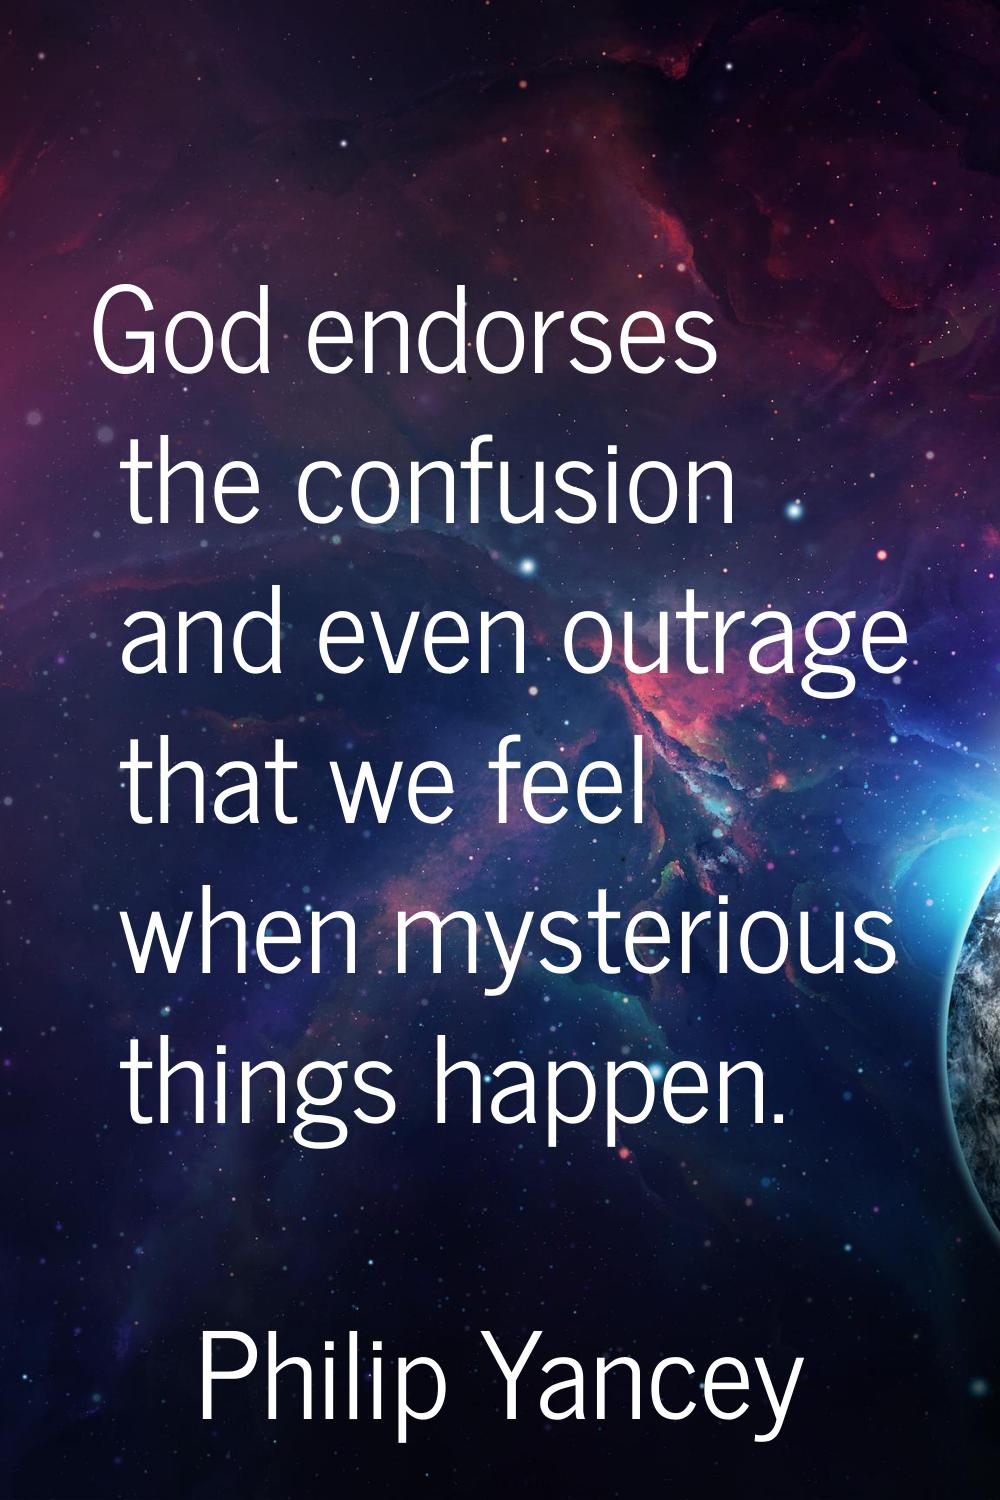 God endorses the confusion and even outrage that we feel when mysterious things happen.